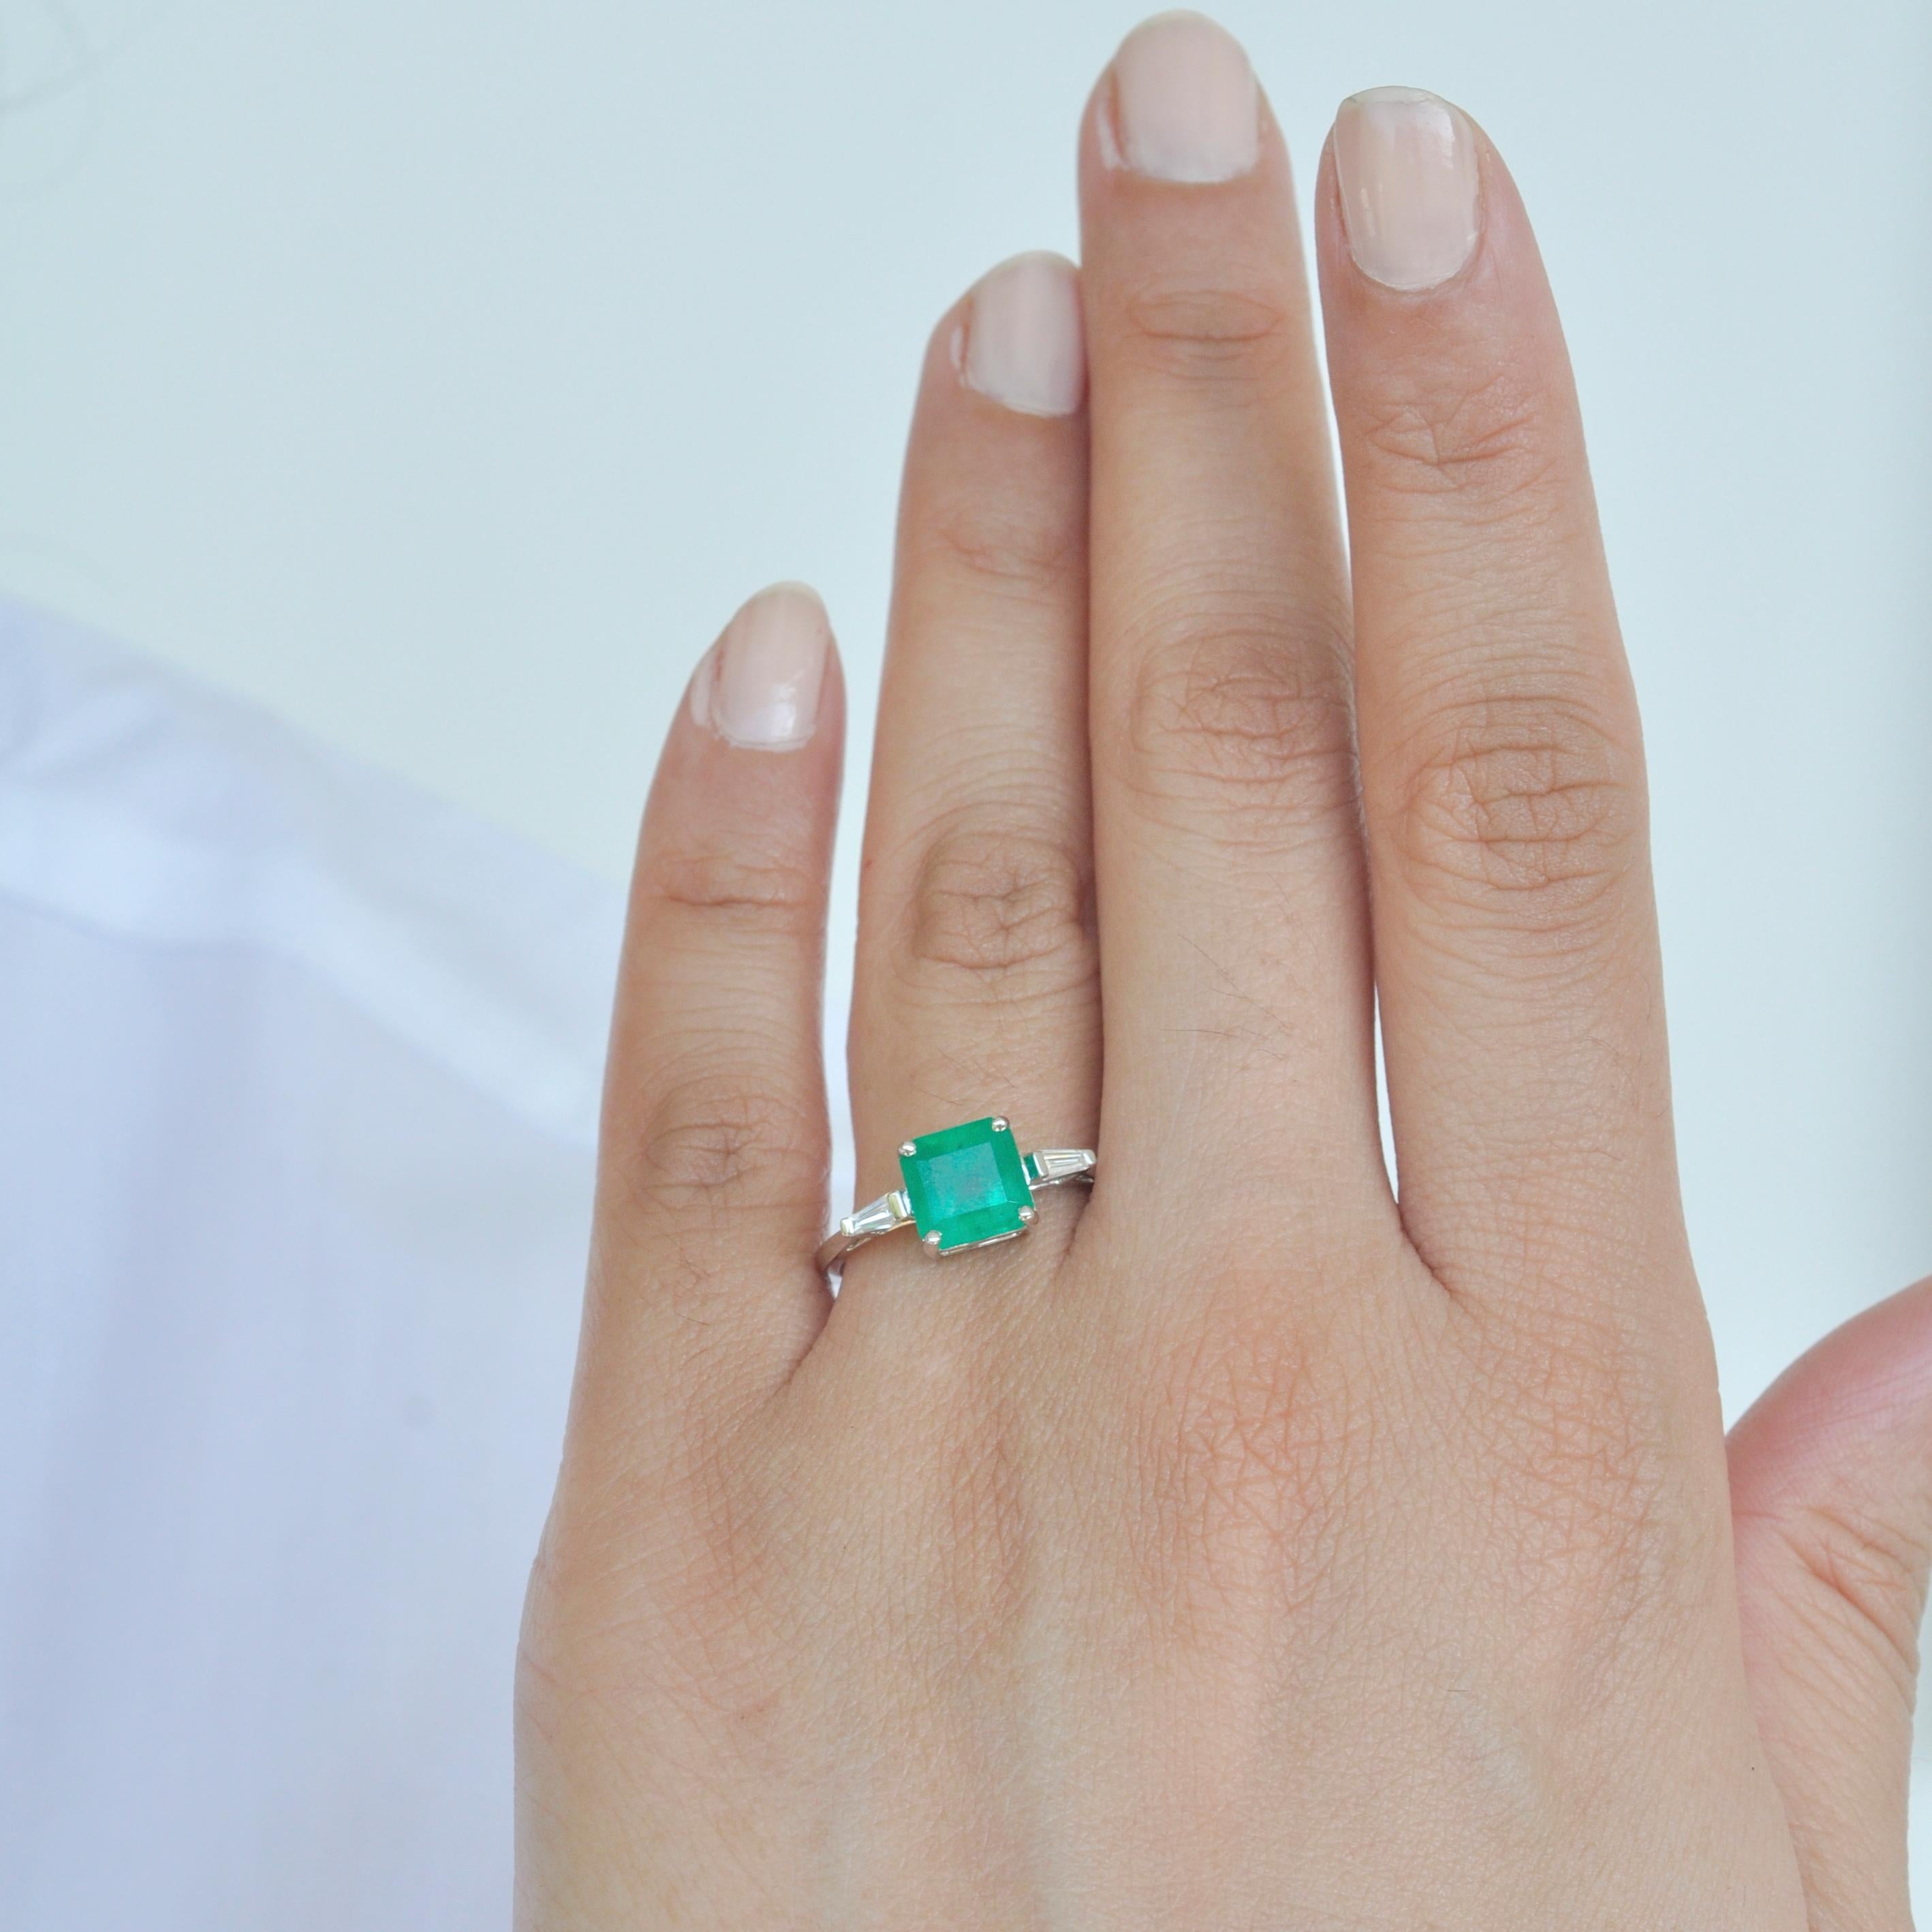 18 karat white gold square colombian emerald diamond contemporary ring suitable for engagement and bridal wear. This Emerald Diamond Ring personifies simplicity and elegance. The colombian emerald 7.5mm square in dimension sit right at the centre